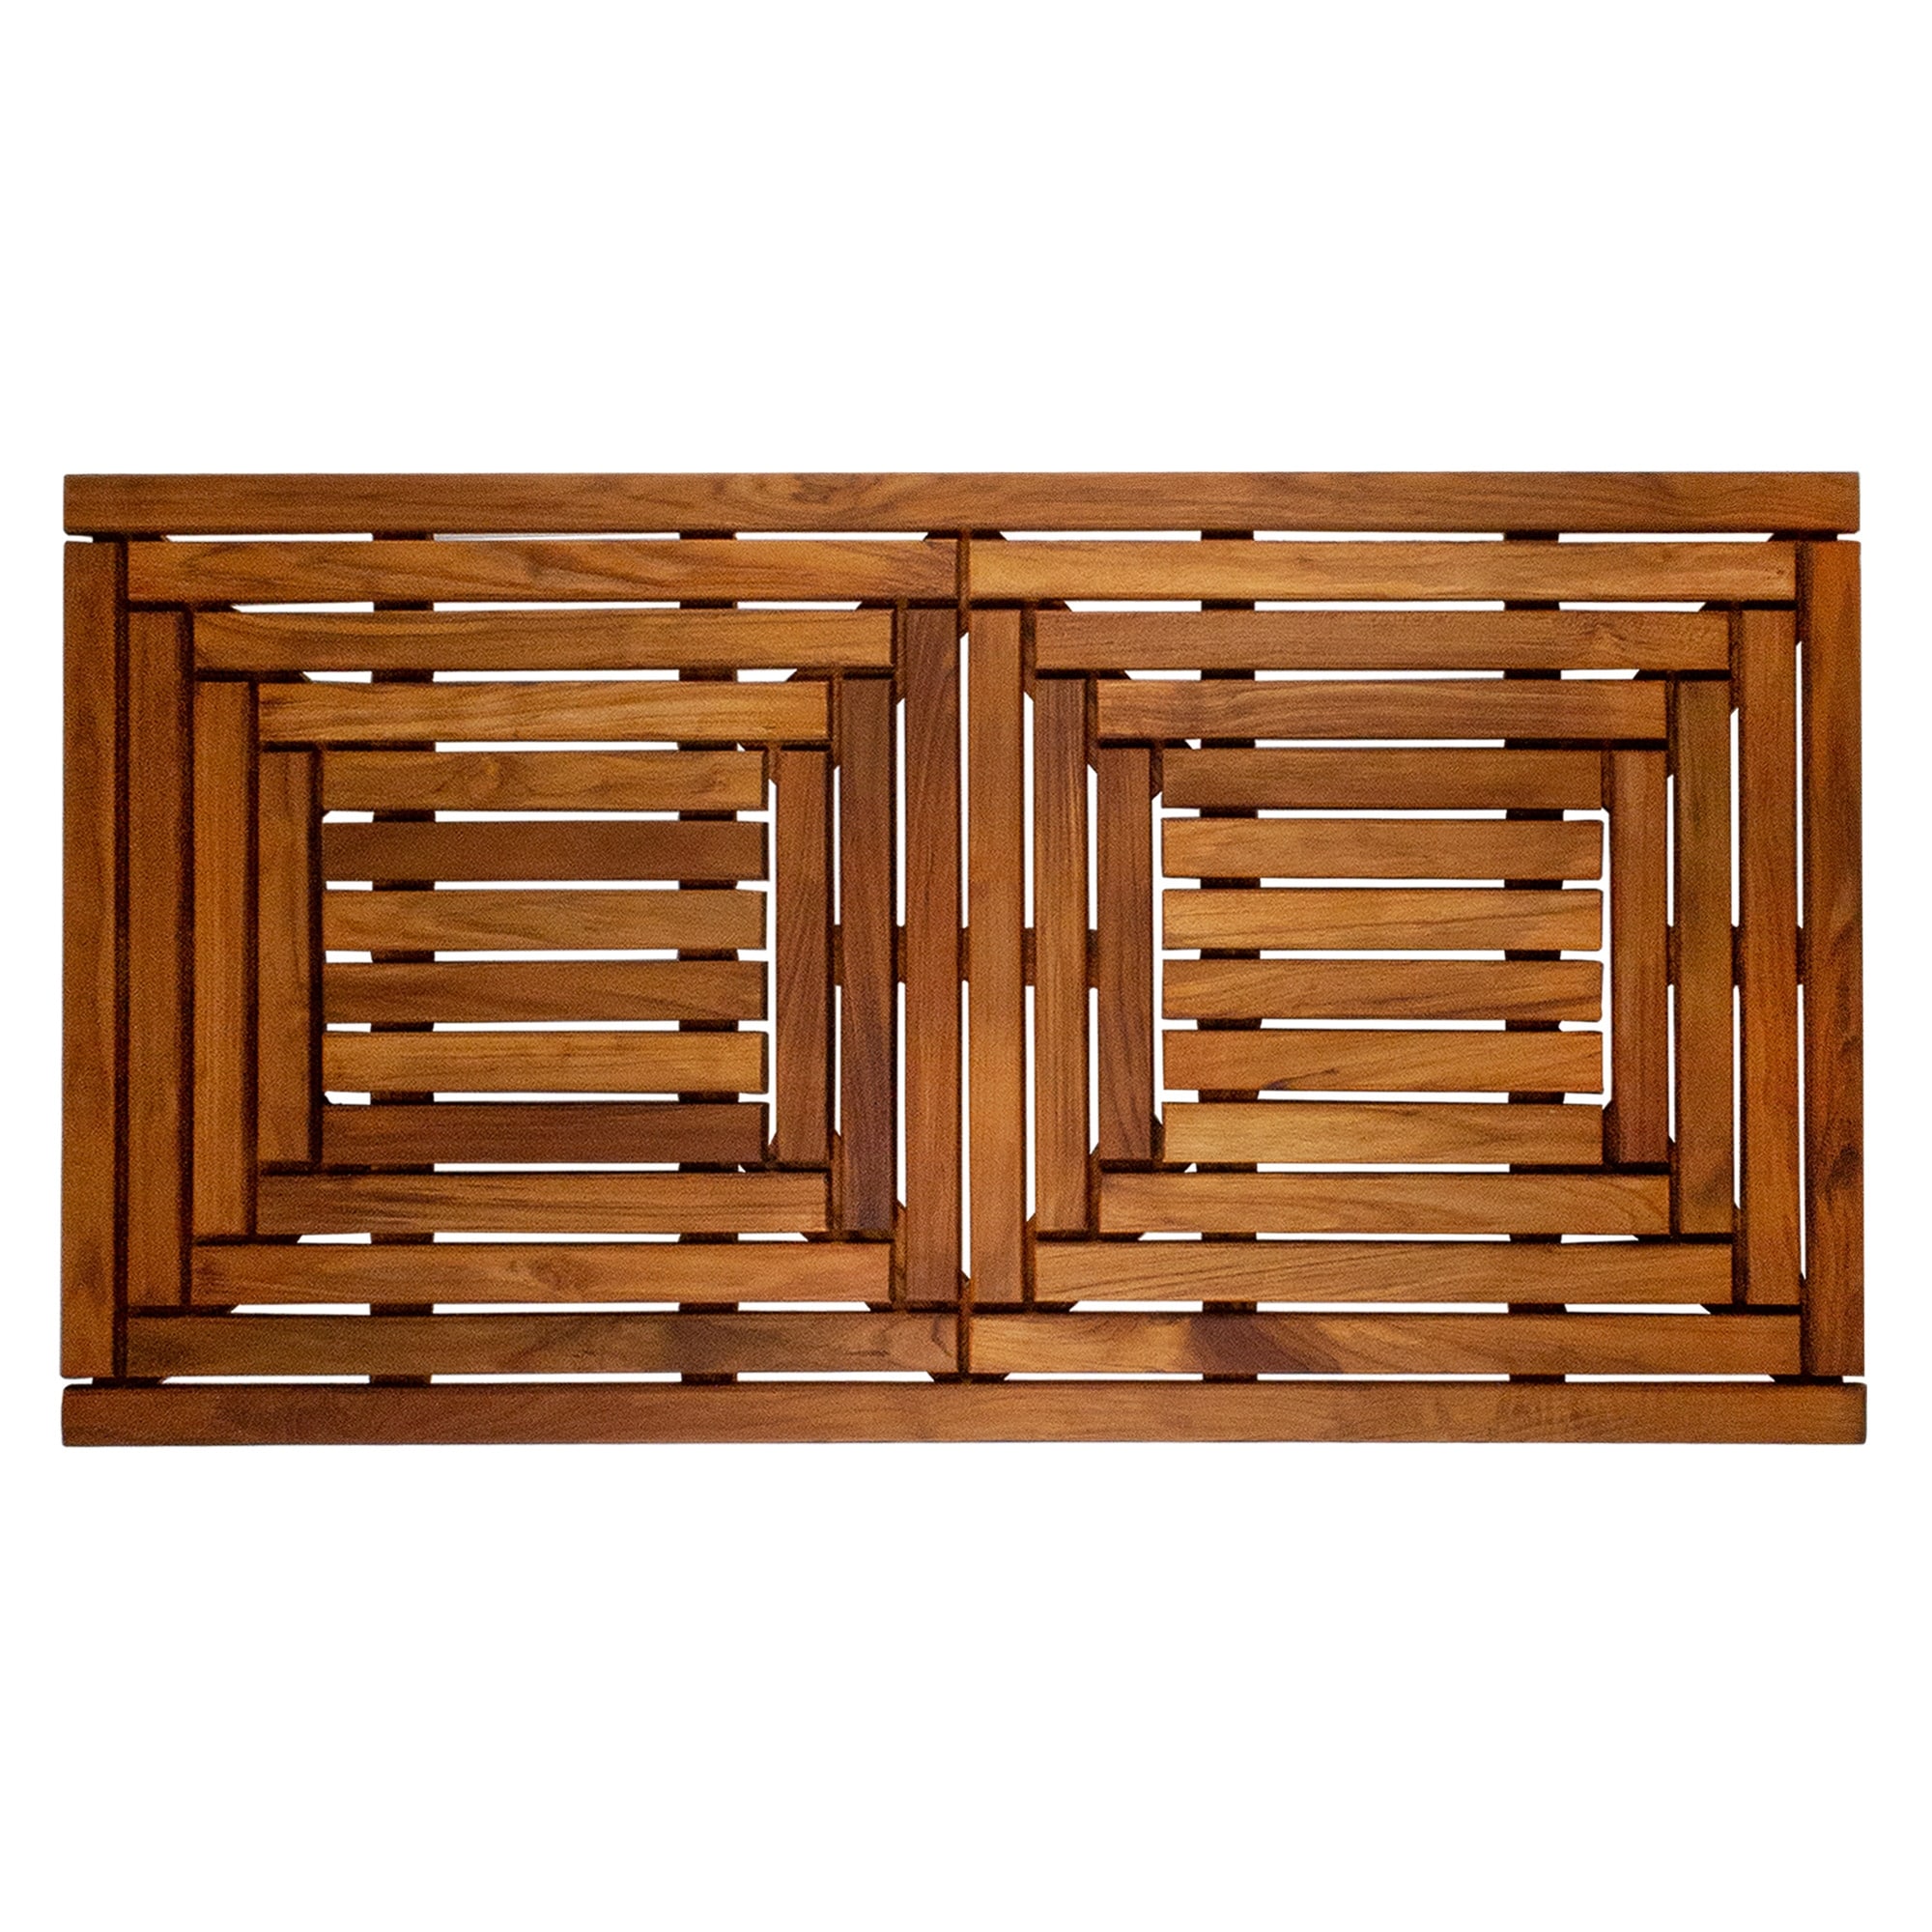 https://ak1.ostkcdn.com/images/products/is/images/direct/8e5b4f70fb08bf1d90a65f8ae557ca424da23006/Nordic-Style-Teak-Oiled-Double-Framed-Shower-Bath-Mat-39%22-x-19%22.jpg